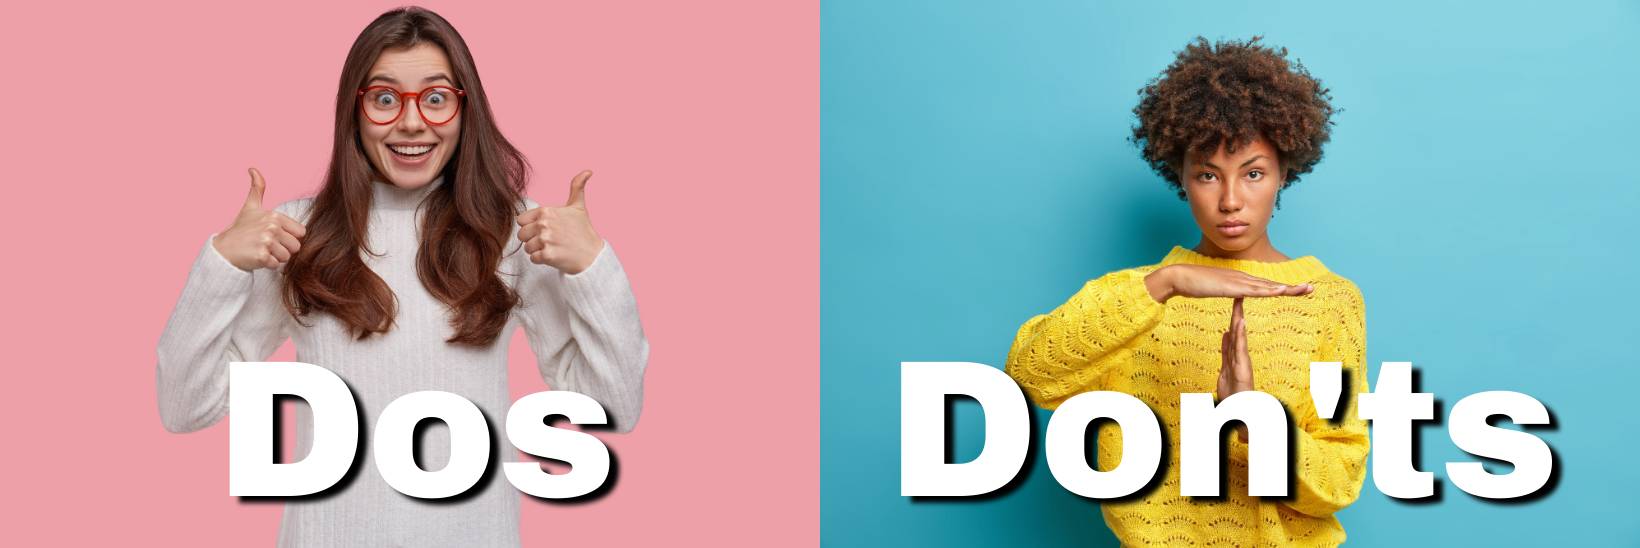 dos and don'ts banner